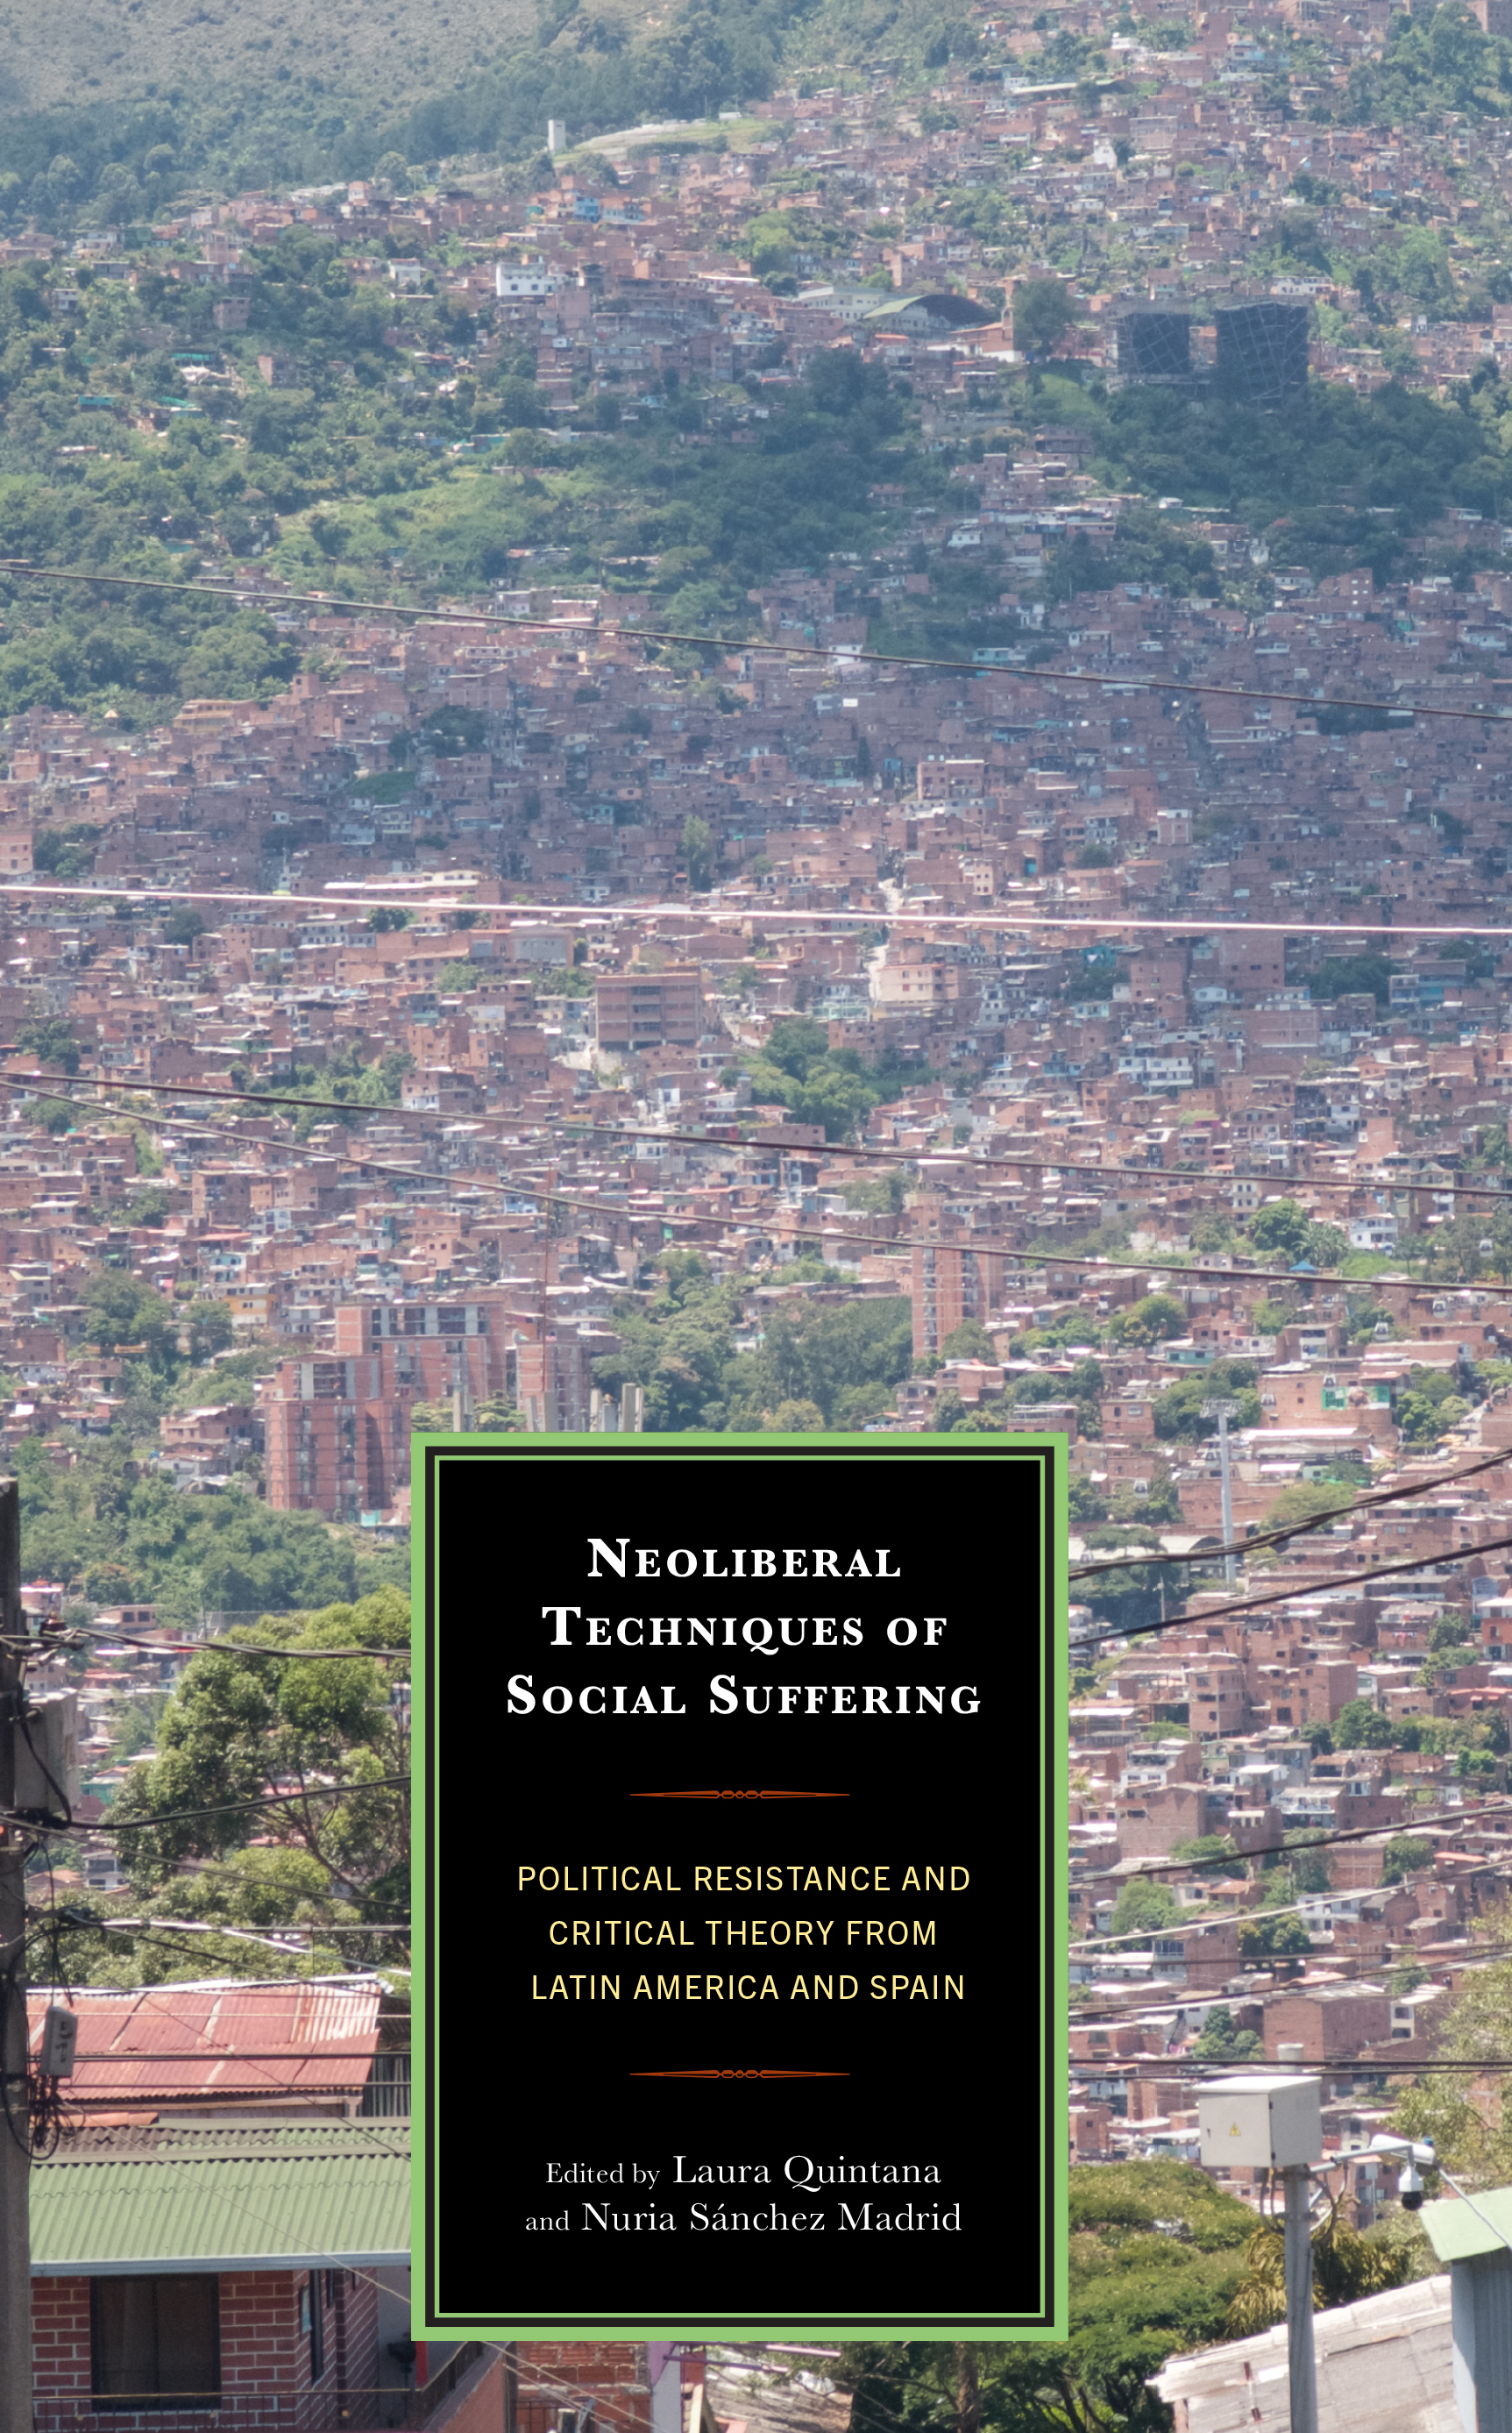 Neoliberal Techniques of Social Suffering: Political Resistance and Critical Theory from Latin America and Spain